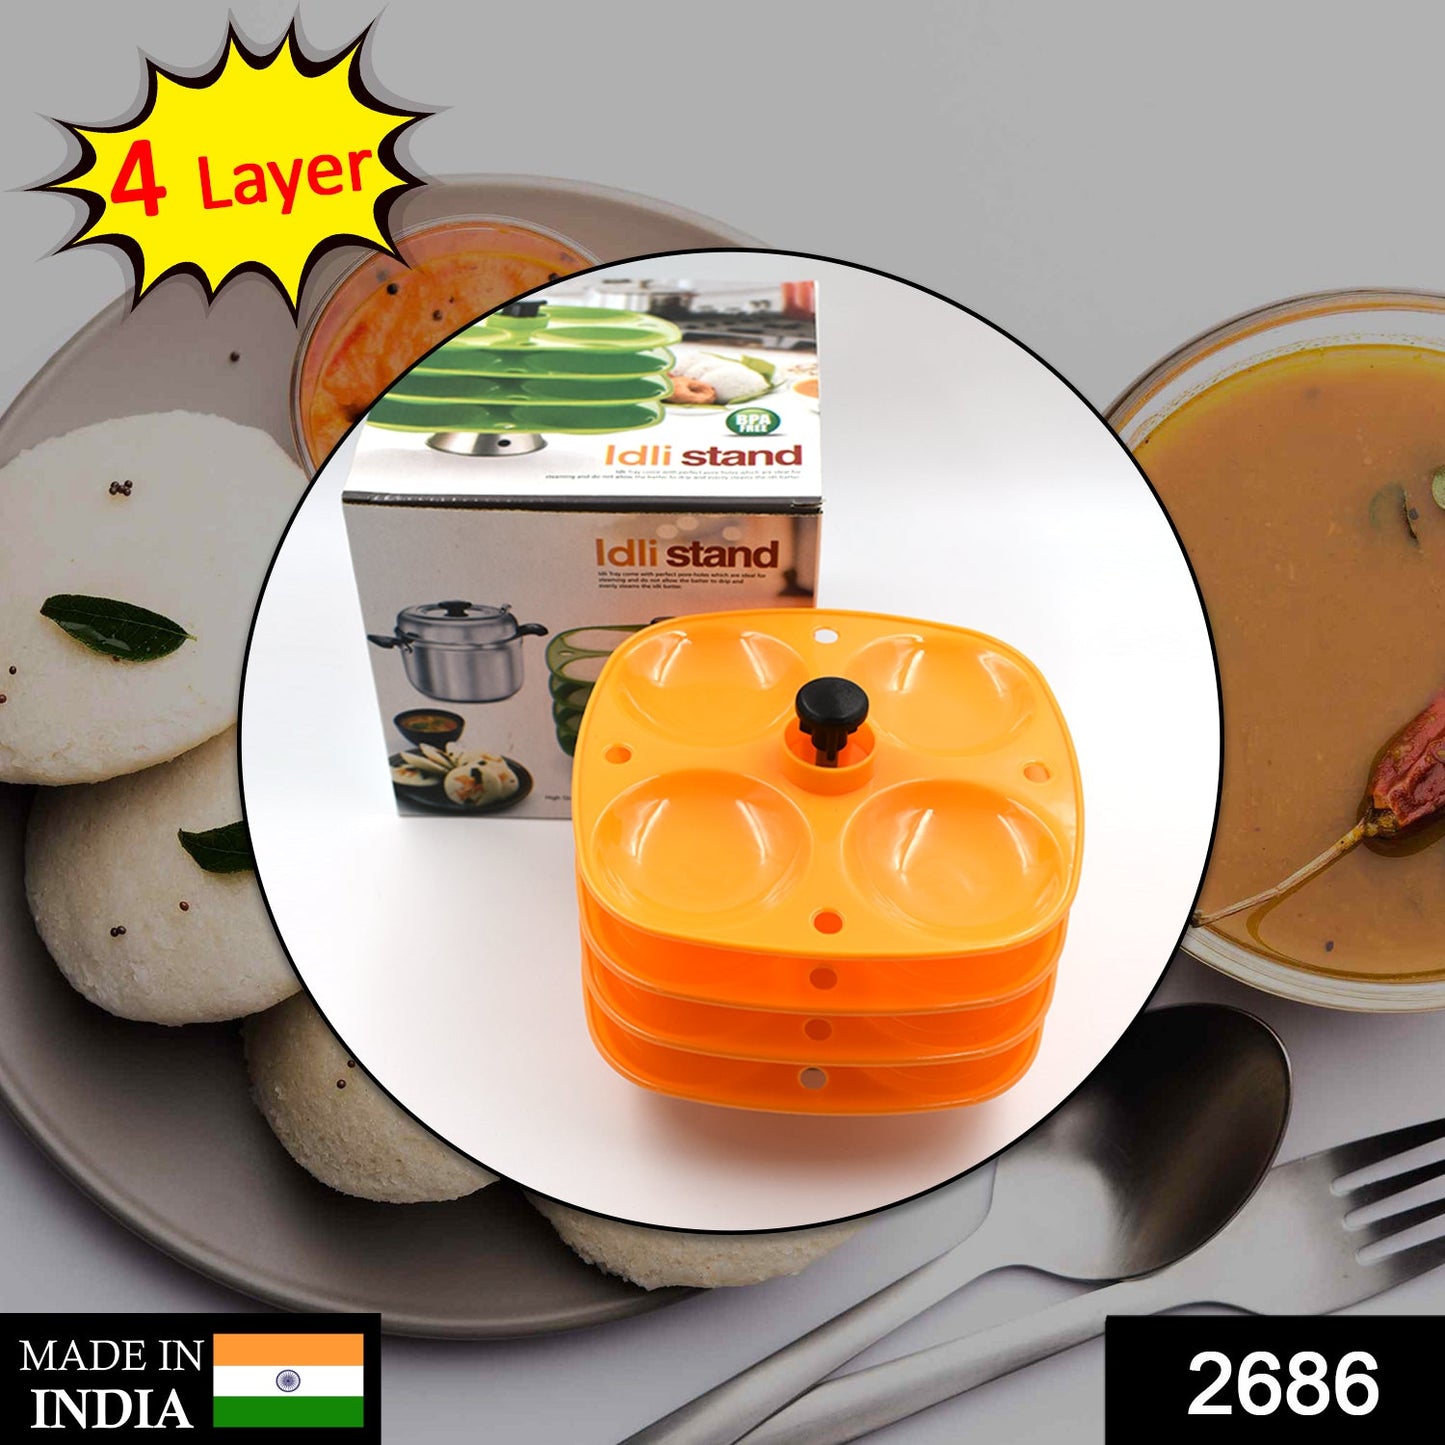 2686 4 Layer Idli Stand used in all kinds of household kitchen purposes for holding and serving idlis. DeoDap